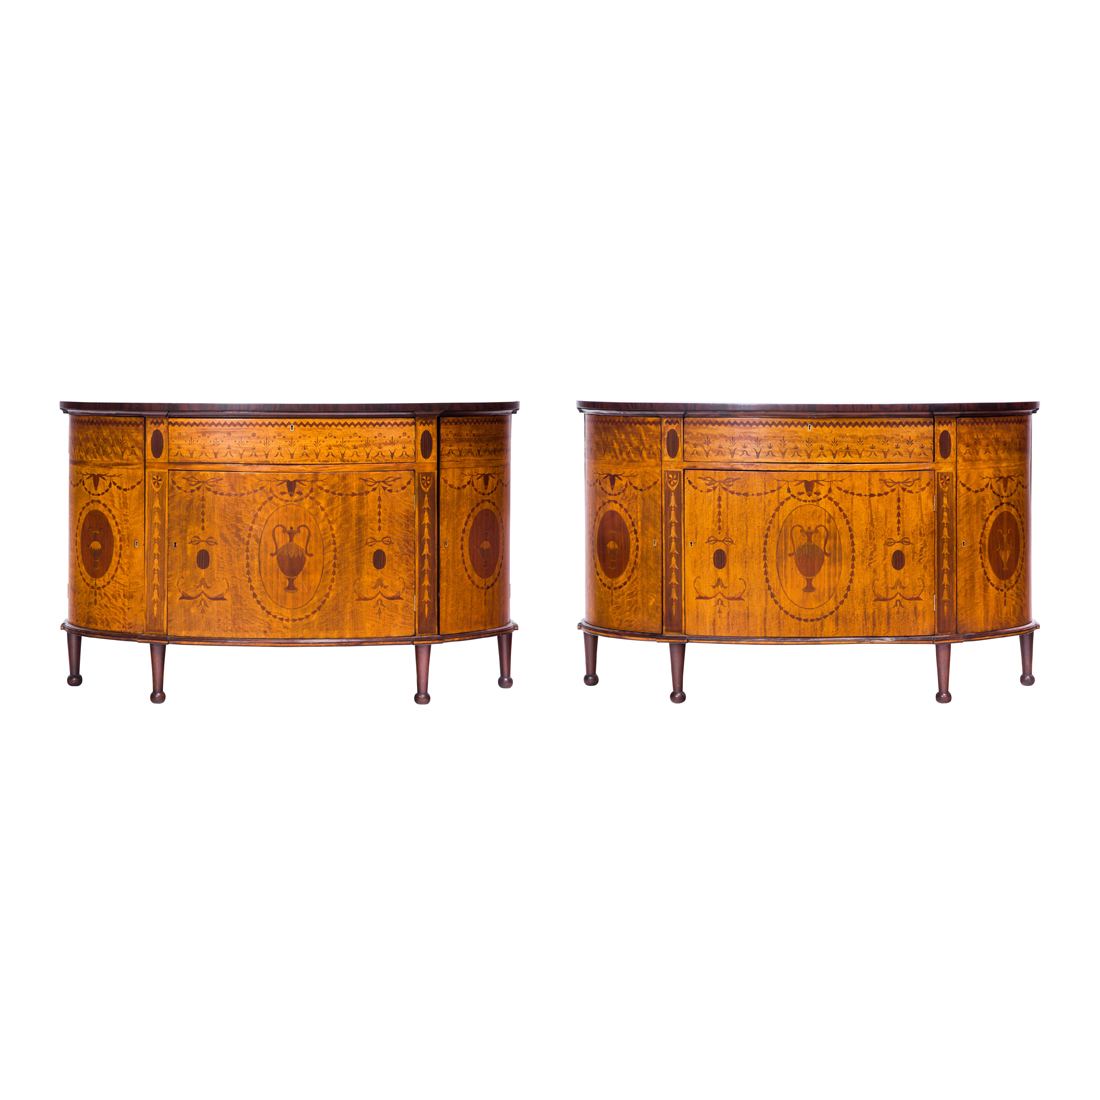 A PAIR OF MARQUETRY DECORATED DEMILUNE 3a2b94